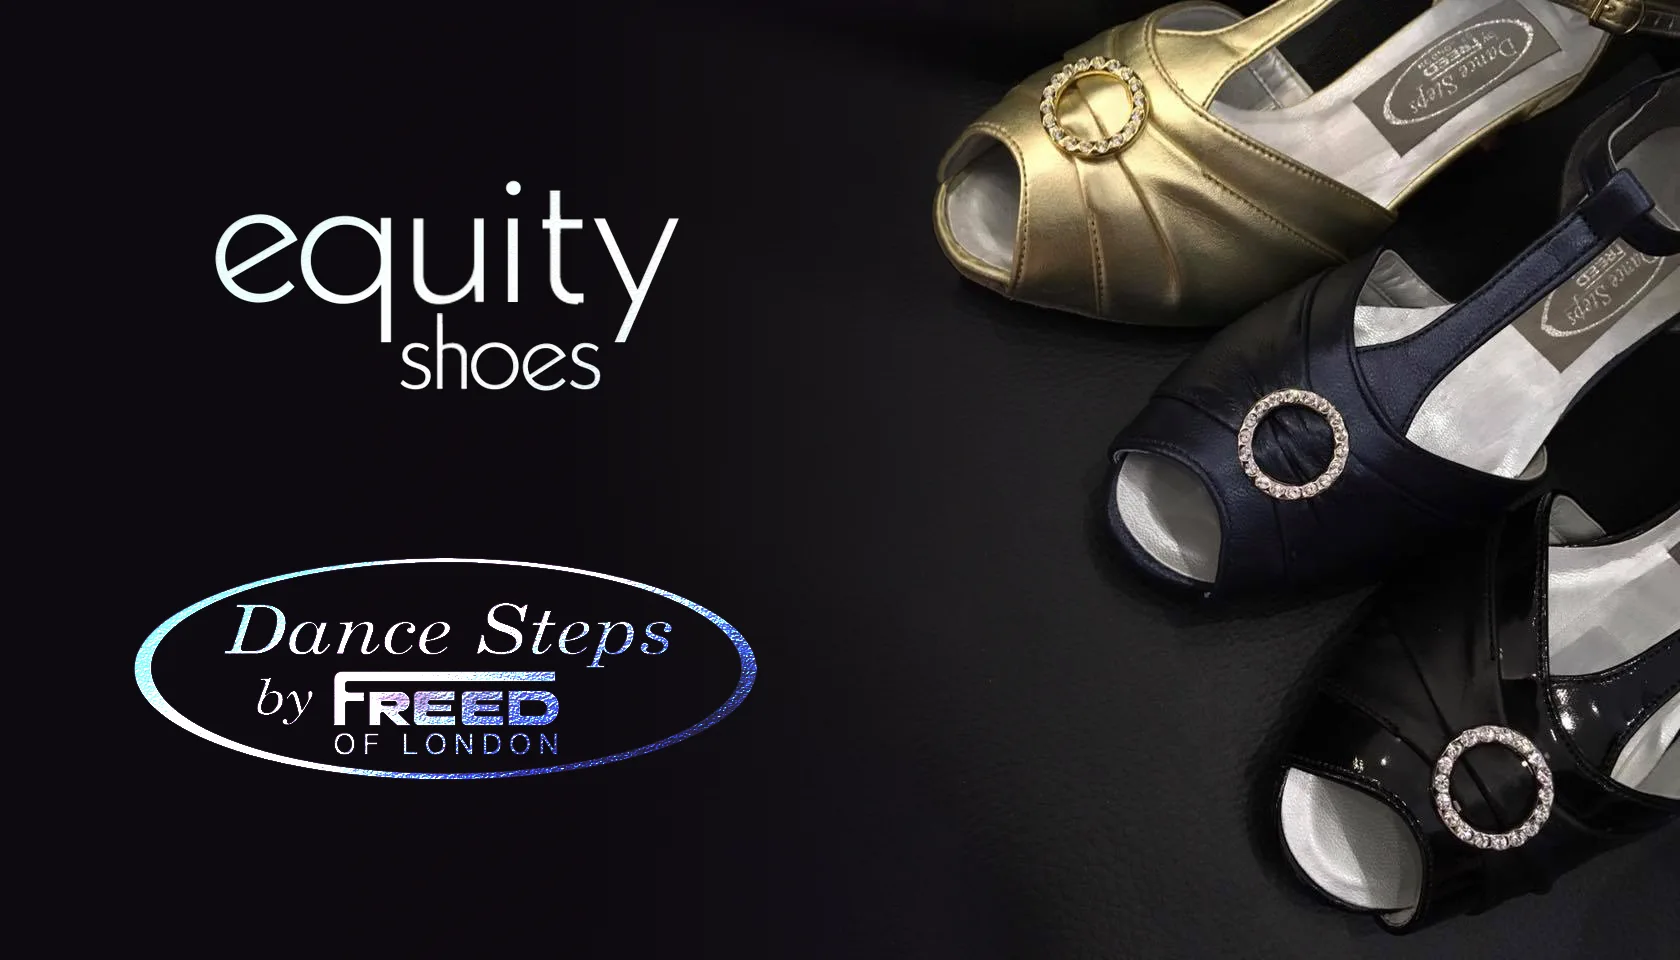 Dancesteps Dance Shoes from Freed of London formally known as Equity Dance Shoes